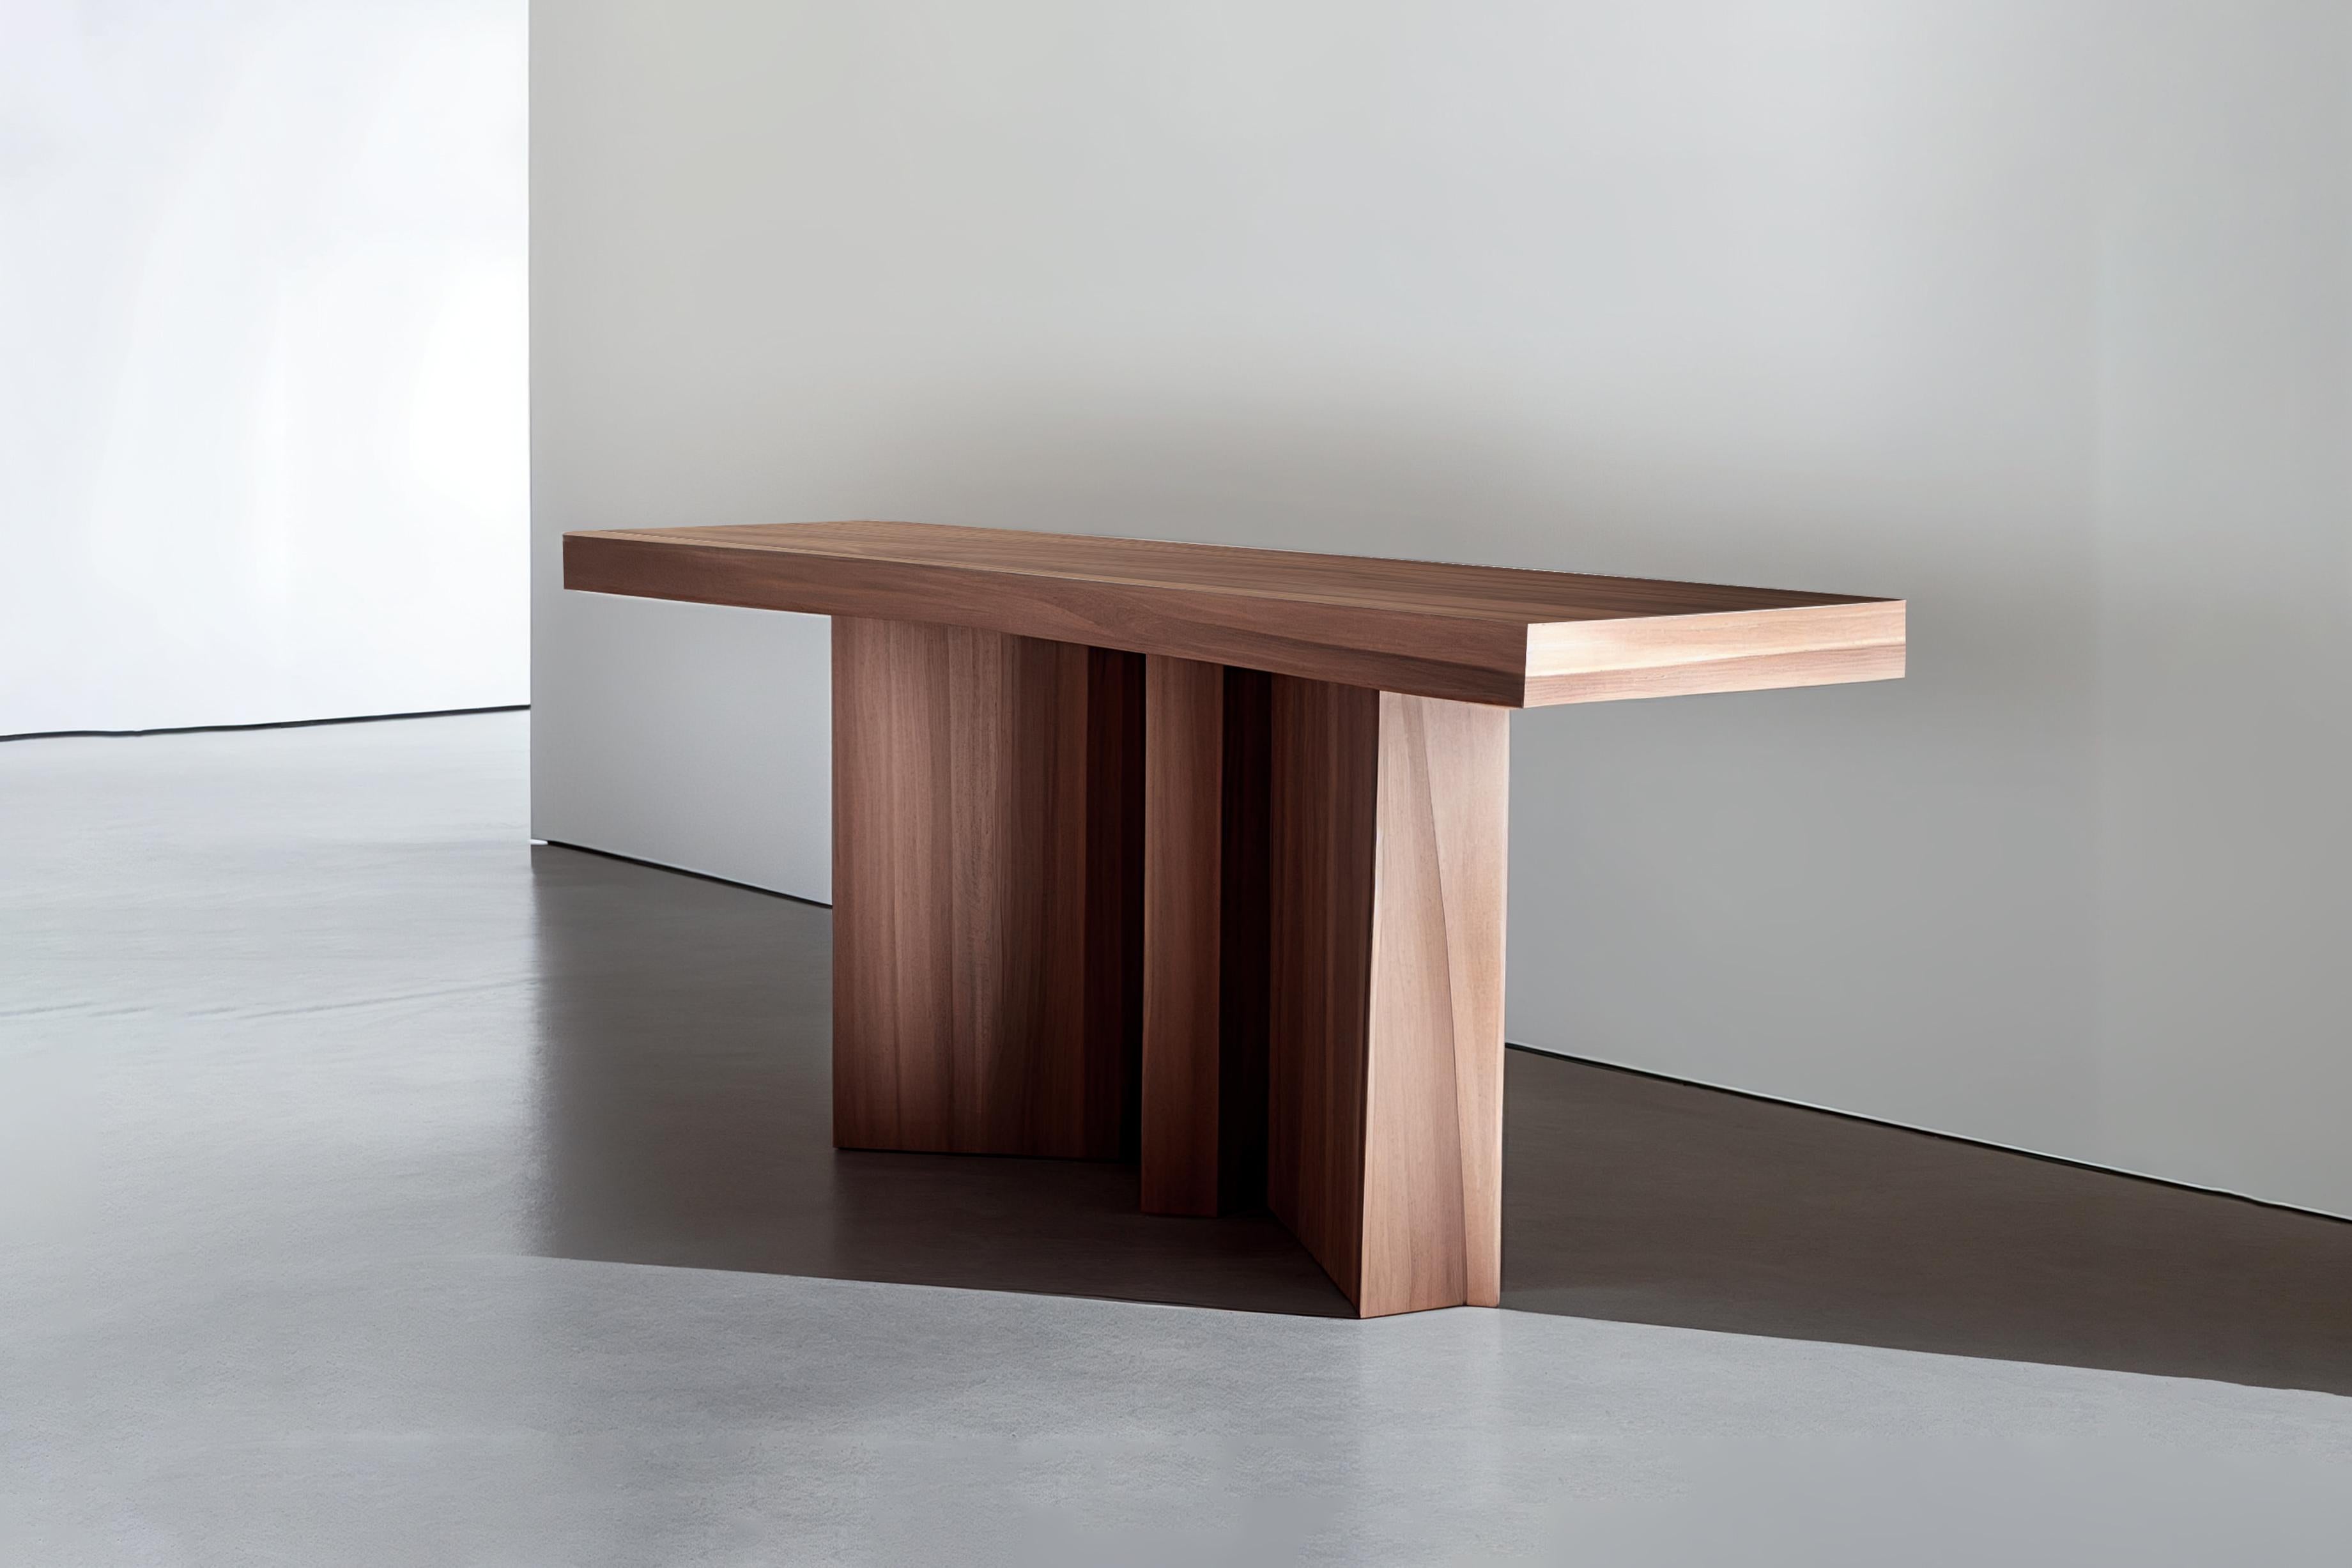 Console made of solid walnut wood stained with a water-based dye and finished with matt polyurethane.
——

NONO is a Mexican design brand with more than 10 years of experience dedicated to the production of interior furnishings, editions, and